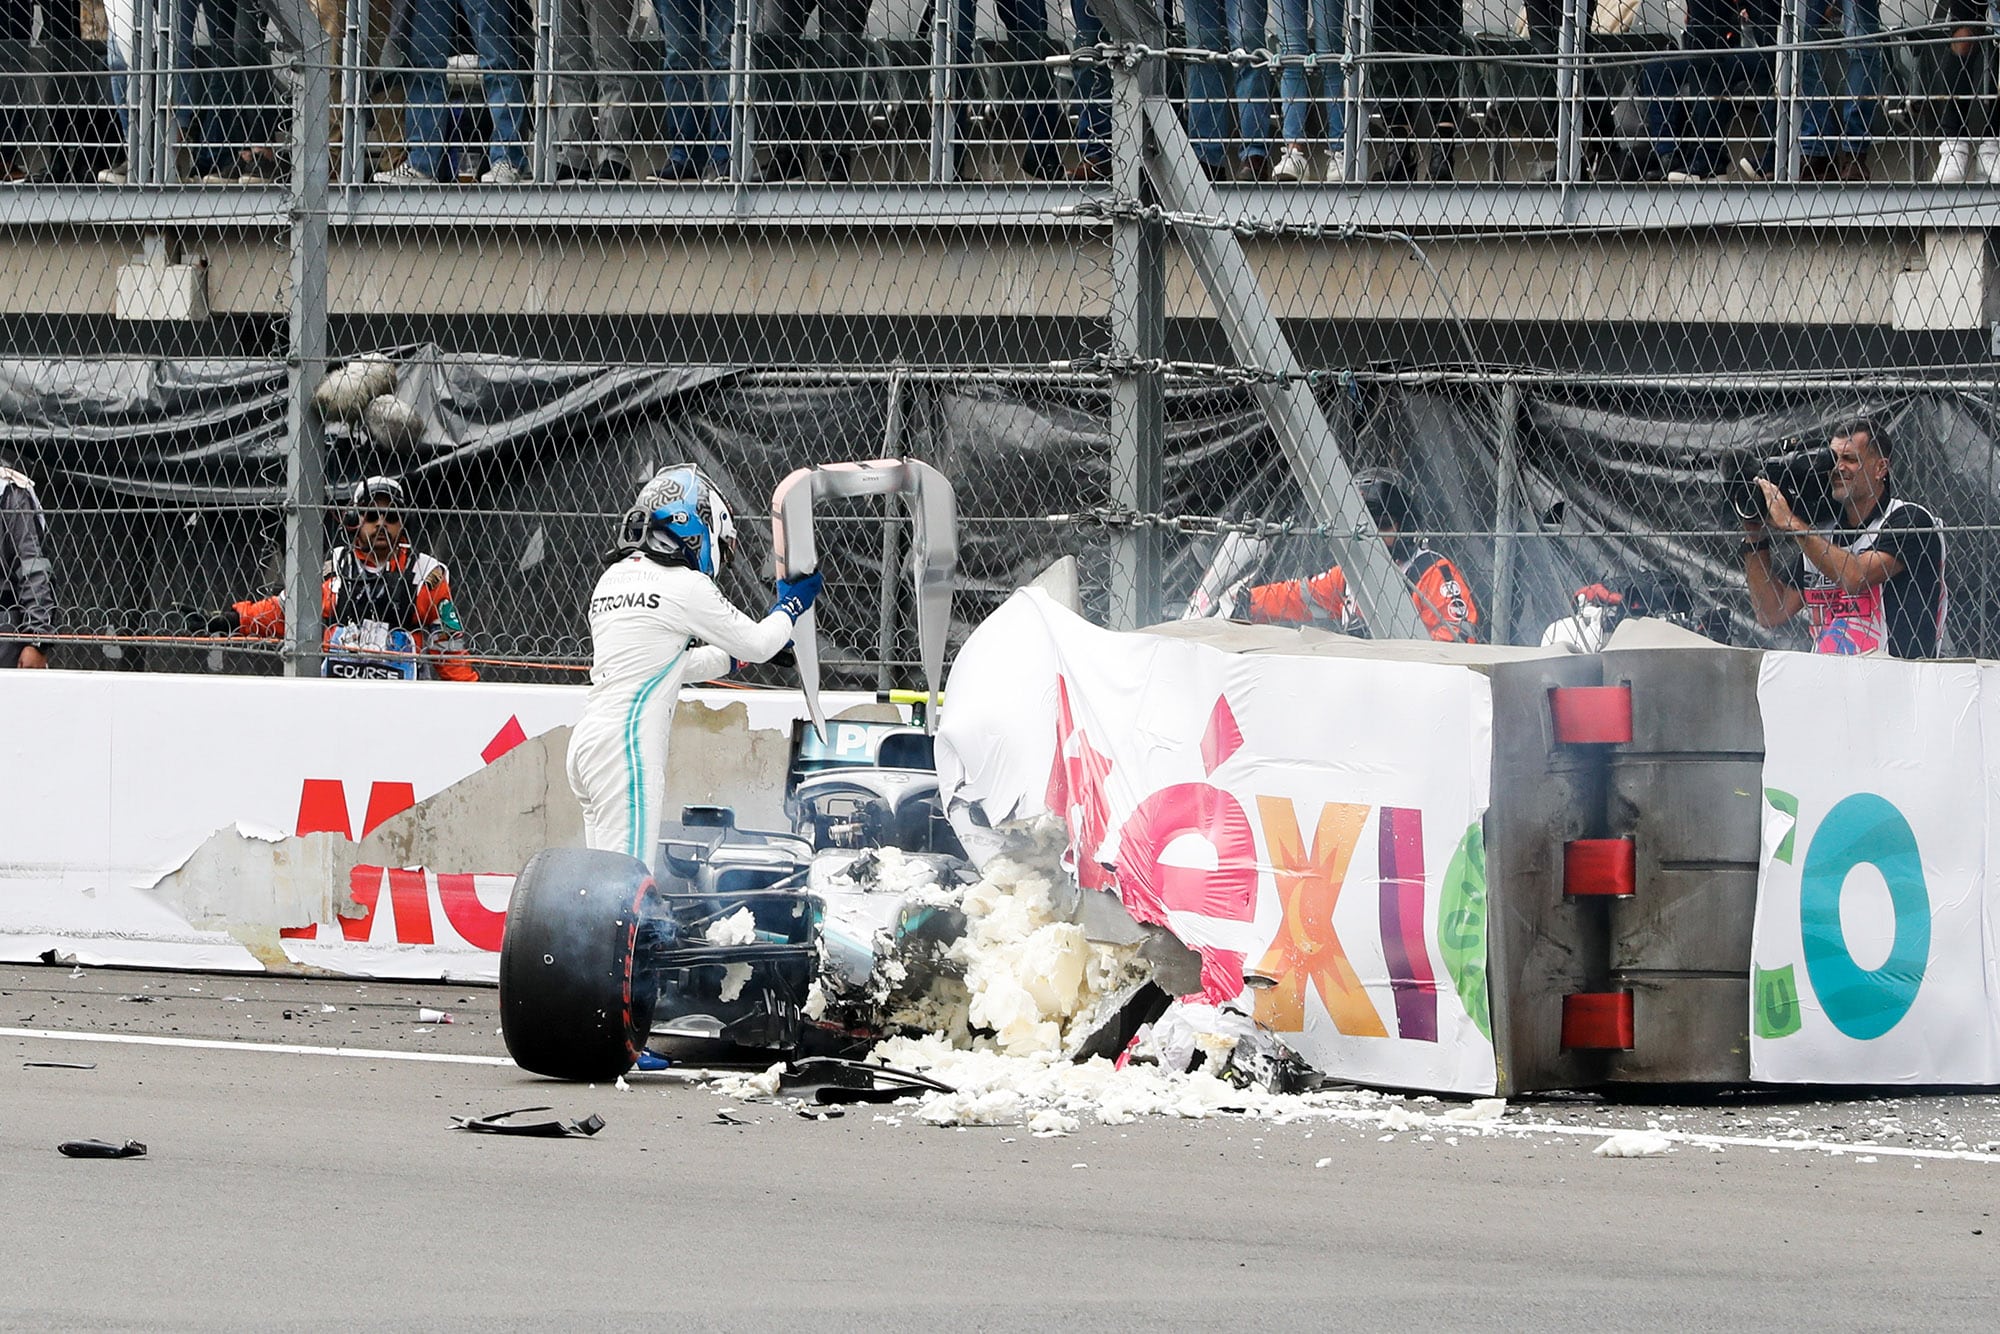 Valtteri Bottas gets out of his car after crashing during qualifying for the 2019 F1 Mexican Grand Prix